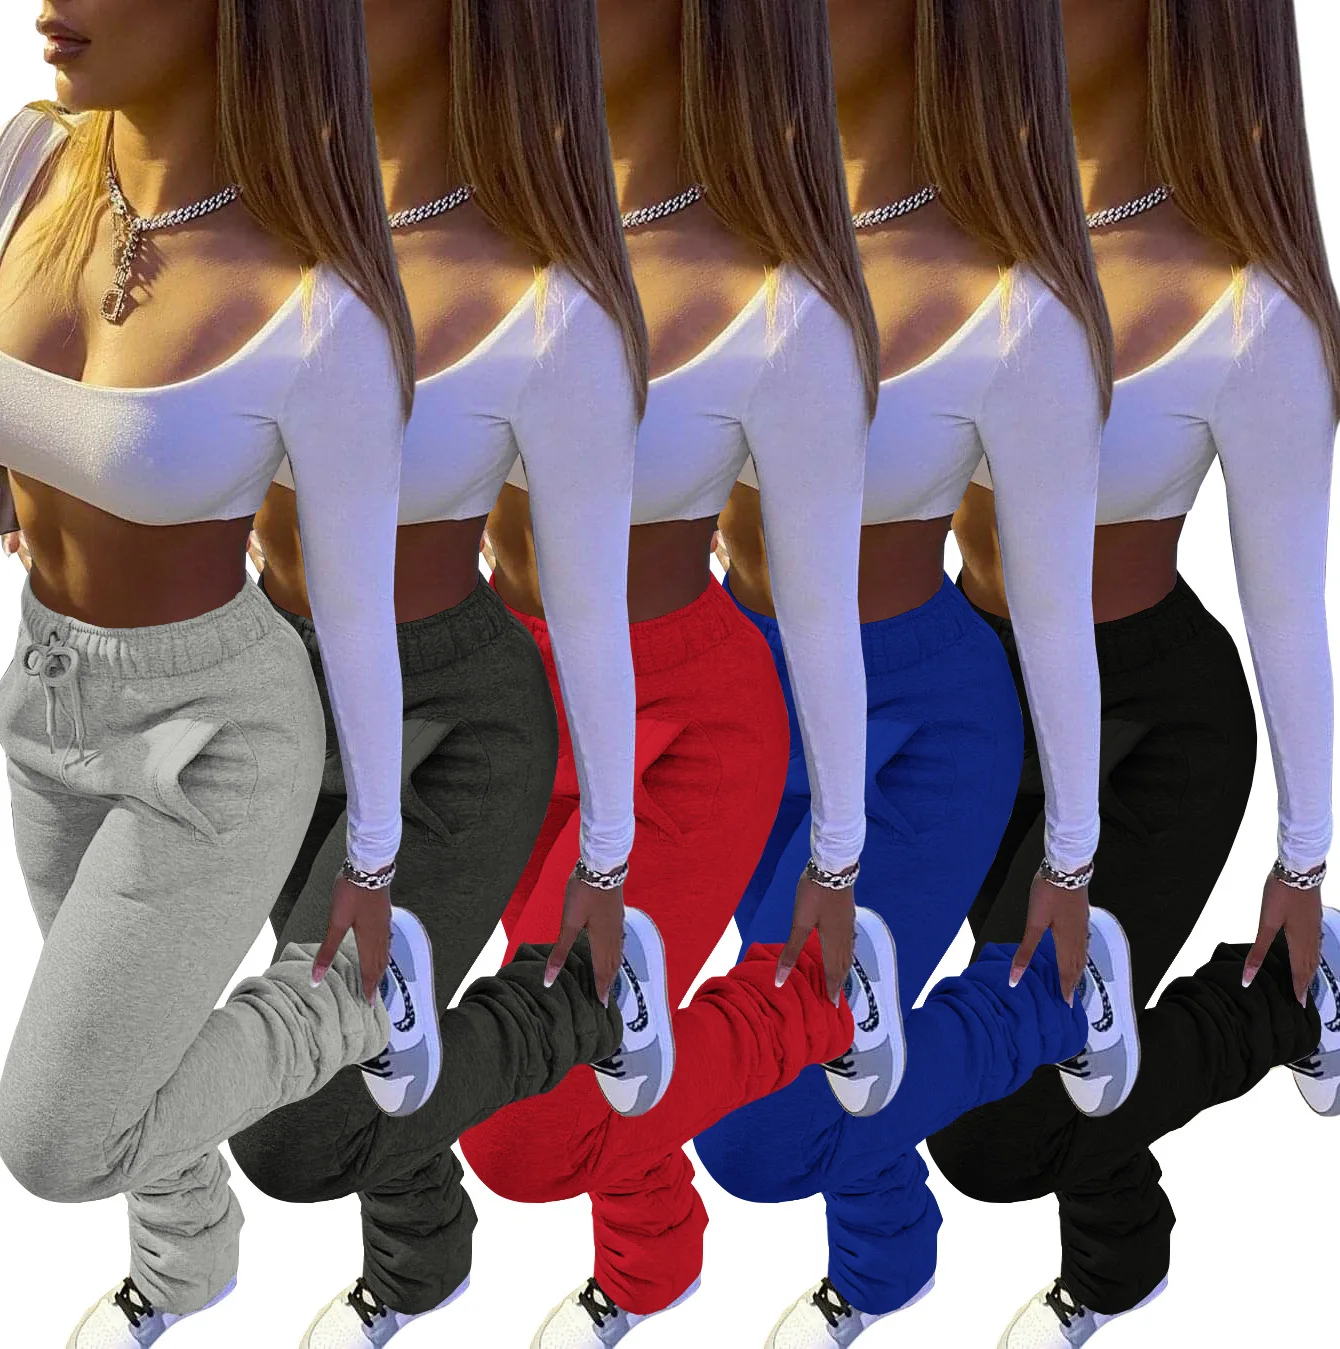 Stacked Sweatpants Women's Fleece Thick Sports Fitness Drawstring with Pocket Streetwear Flare Pants Bulk Item Wholesale Lots plastic hands clapper match applause maker sports game props bulk mini toys small slap performing the gift